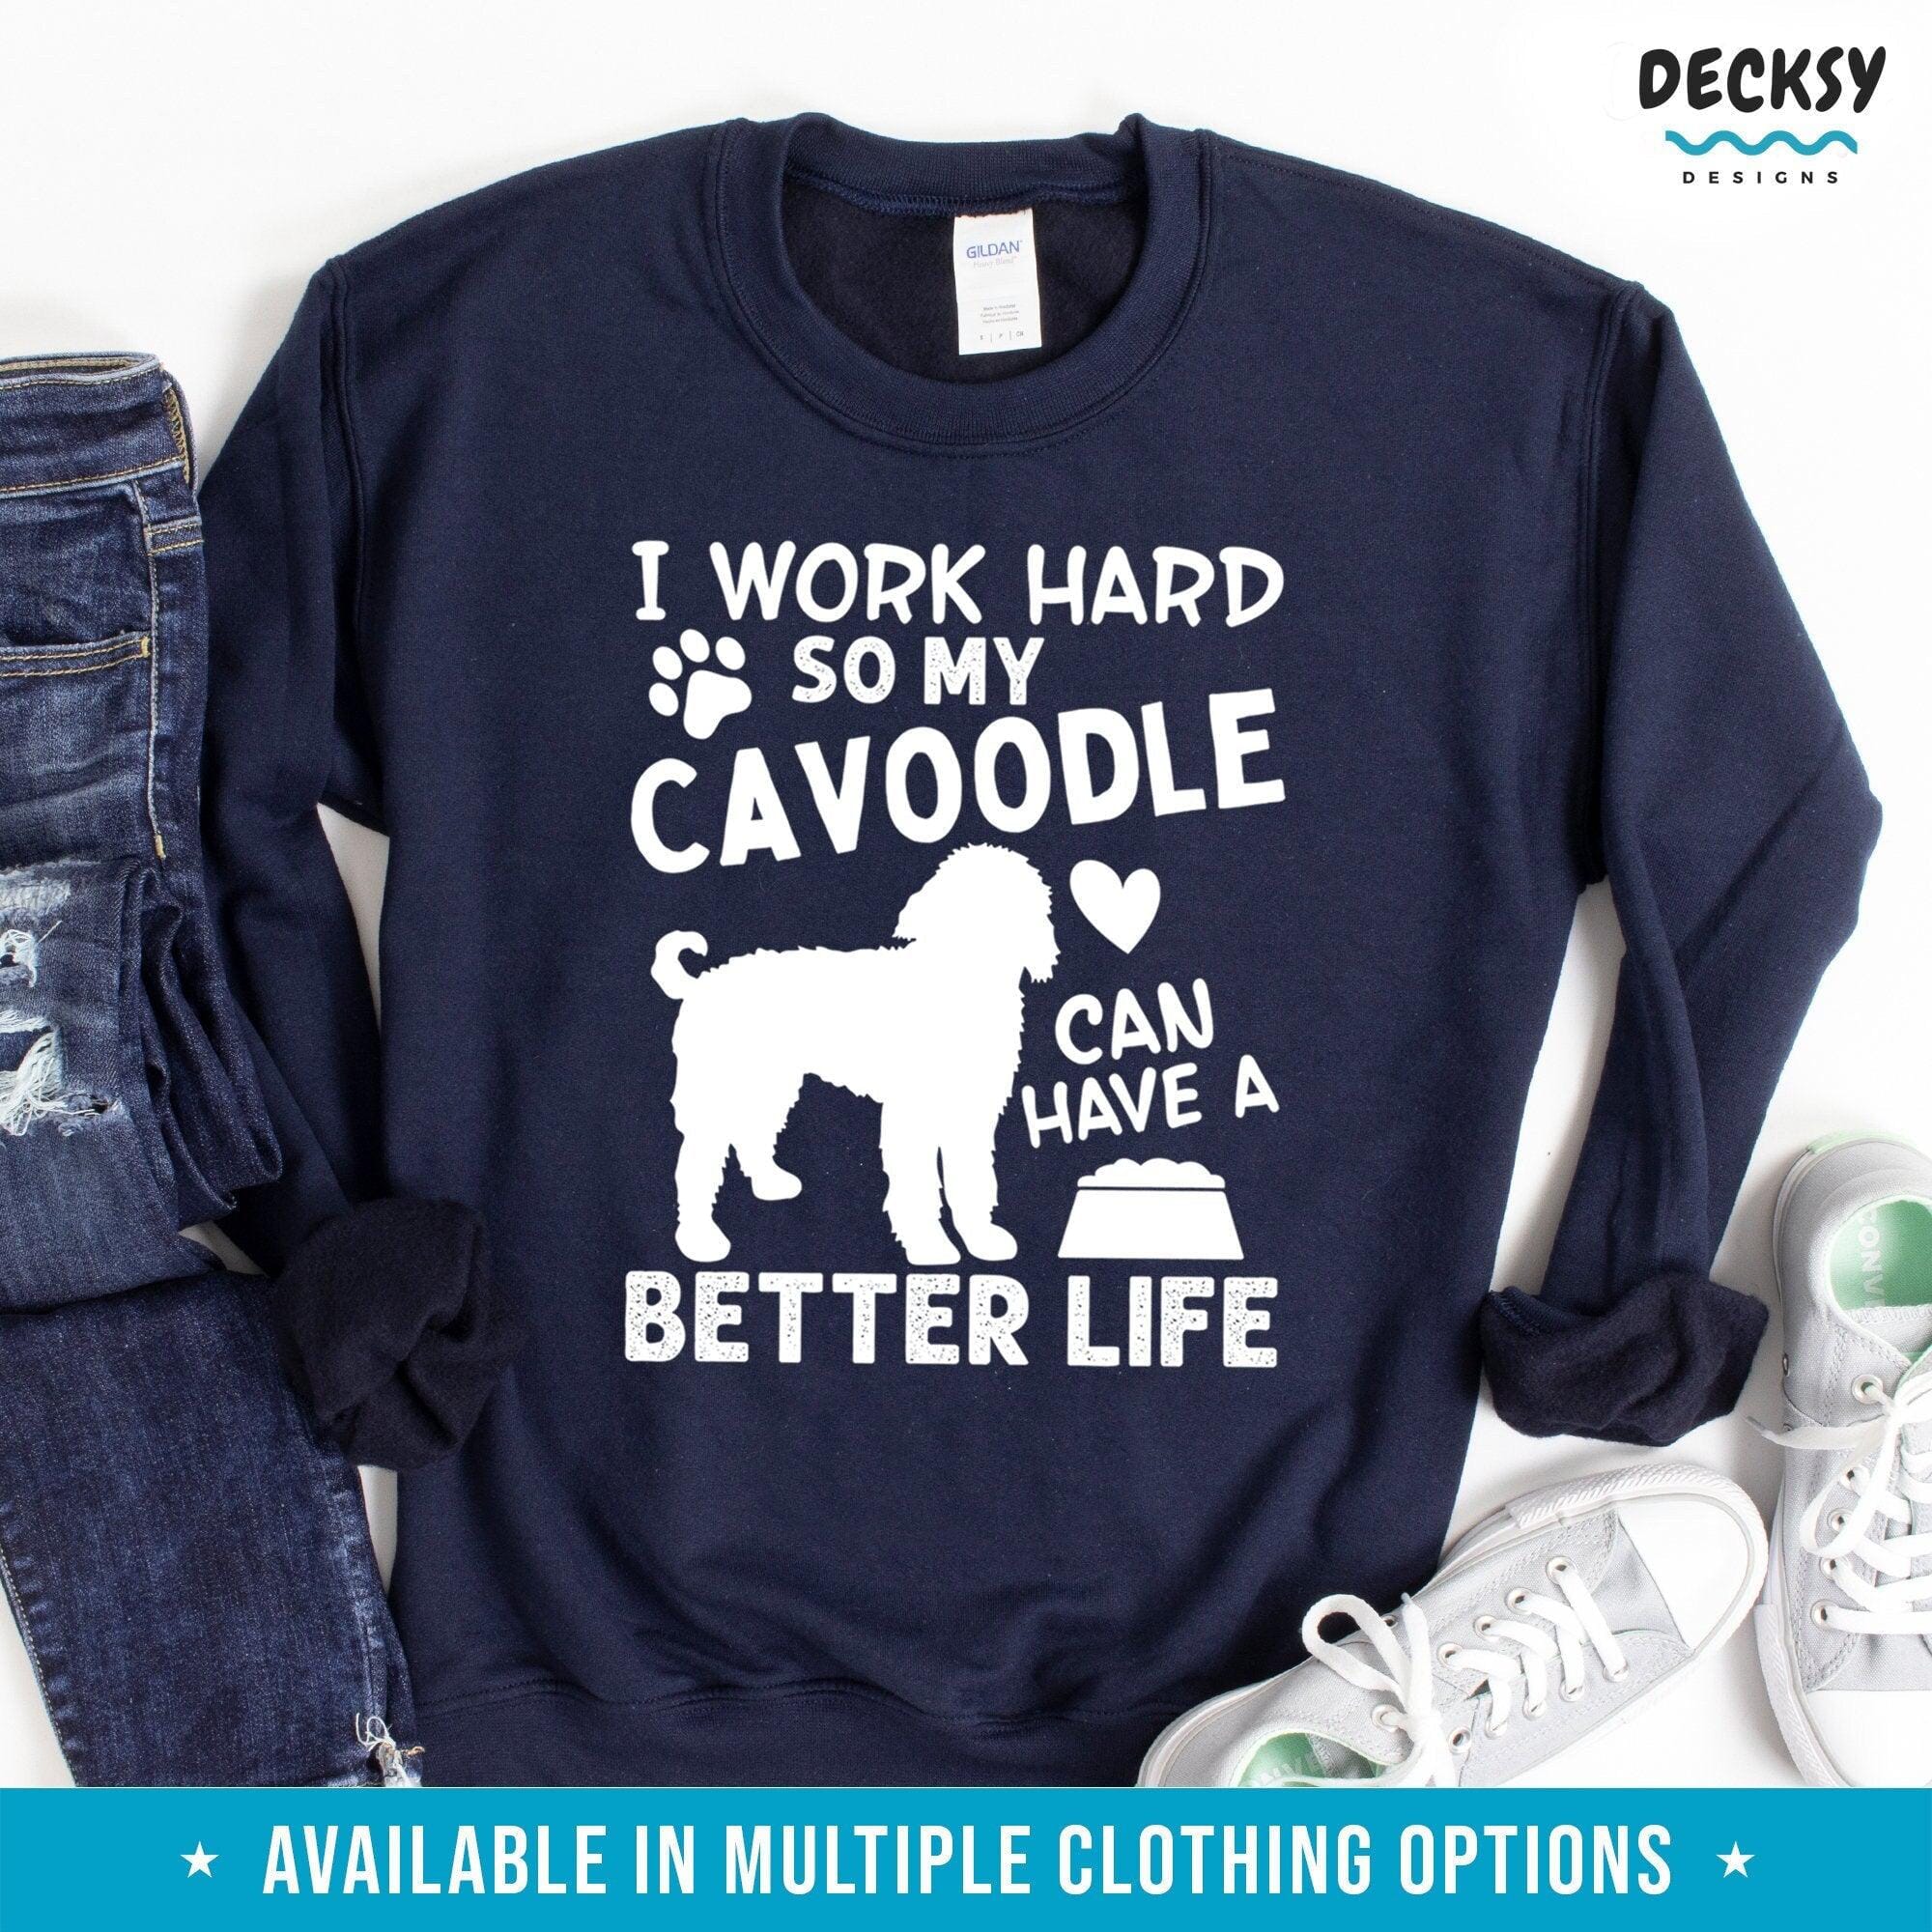 Cavoodle Shirt, Dog Lover Gift-Clothing:Gender-Neutral Adult Clothing:Tops & Tees:T-shirts:Graphic Tees-DecksyDesigns